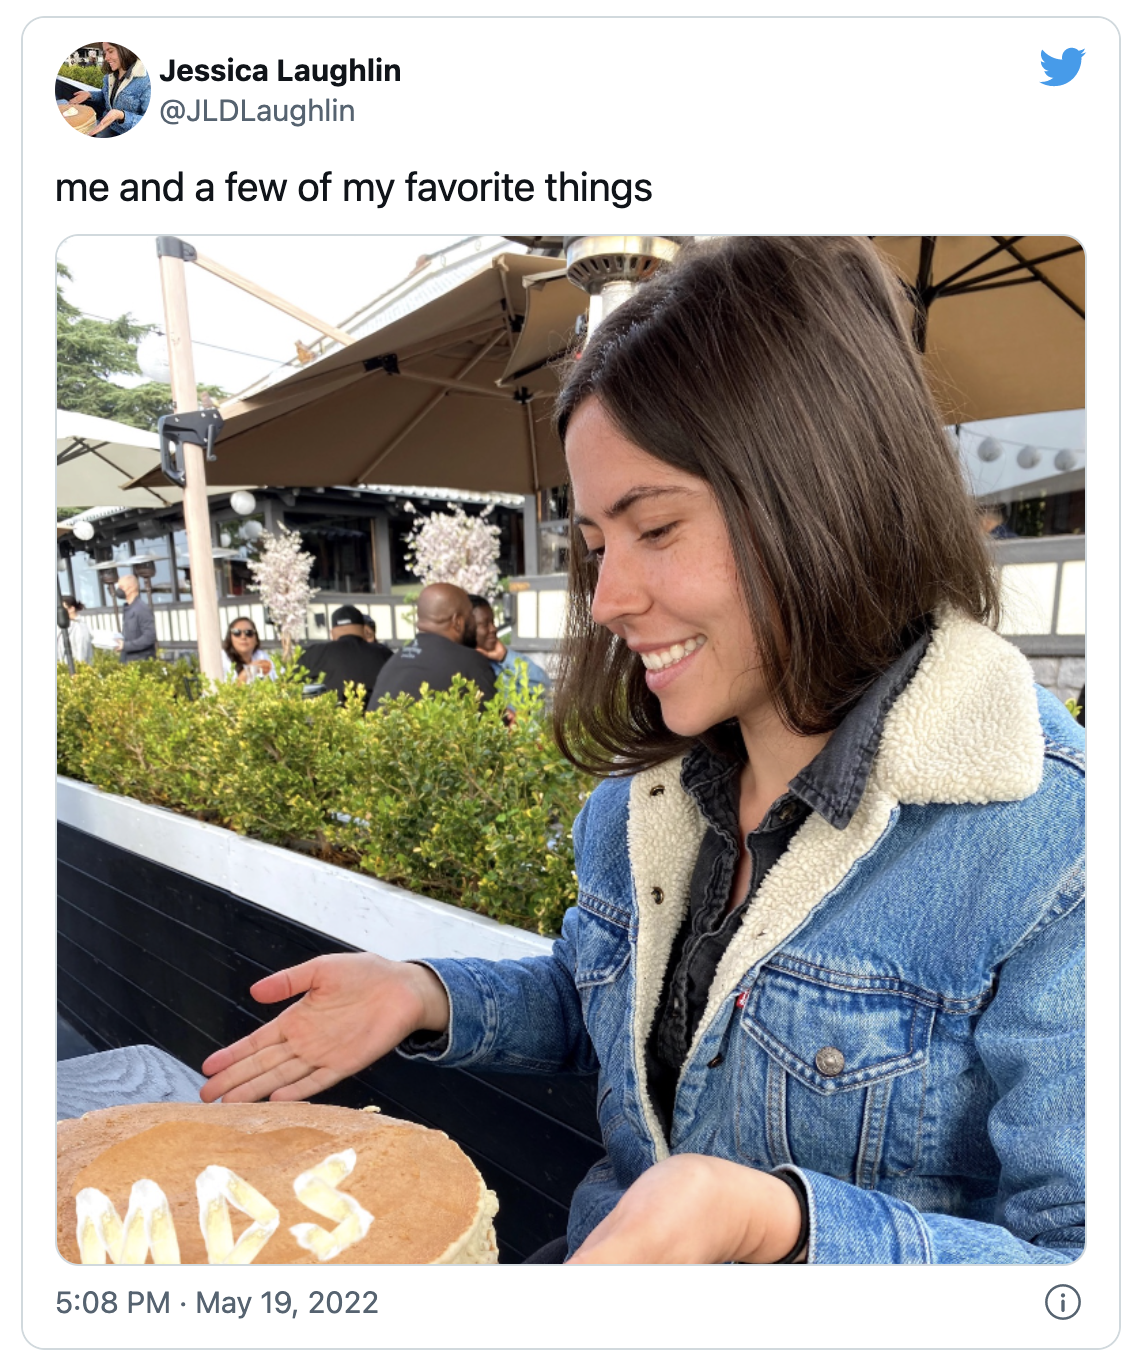 A tweet that reads: "me and a few of my favorite things" and then shows a picture of a woman with a stack of pancakes that has the letters "MDS" written on them.